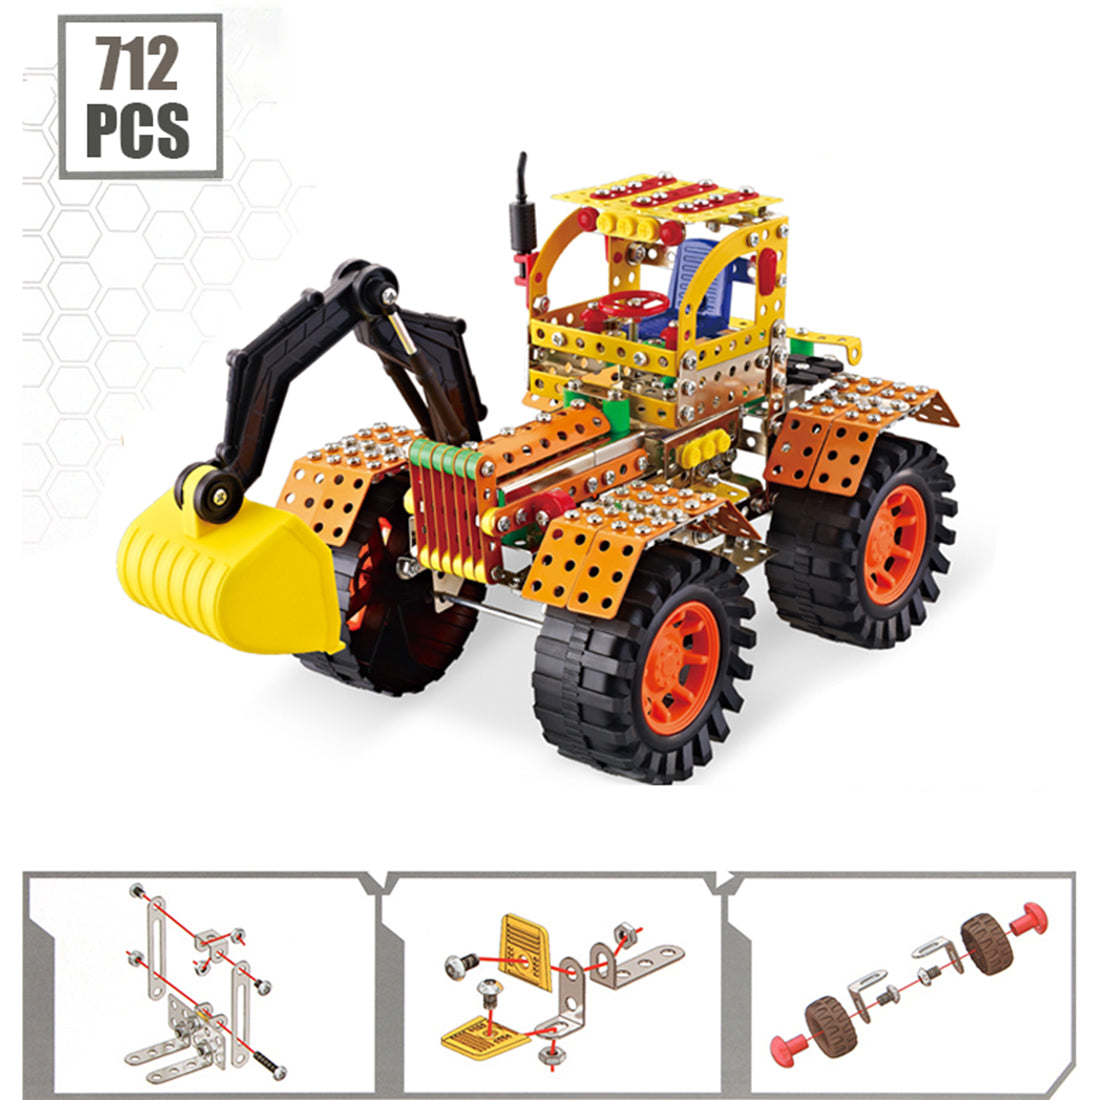 712Pcs Metal Mechanical Construction Excavator Model Building Kit Toys for Adults Age 8 and Up